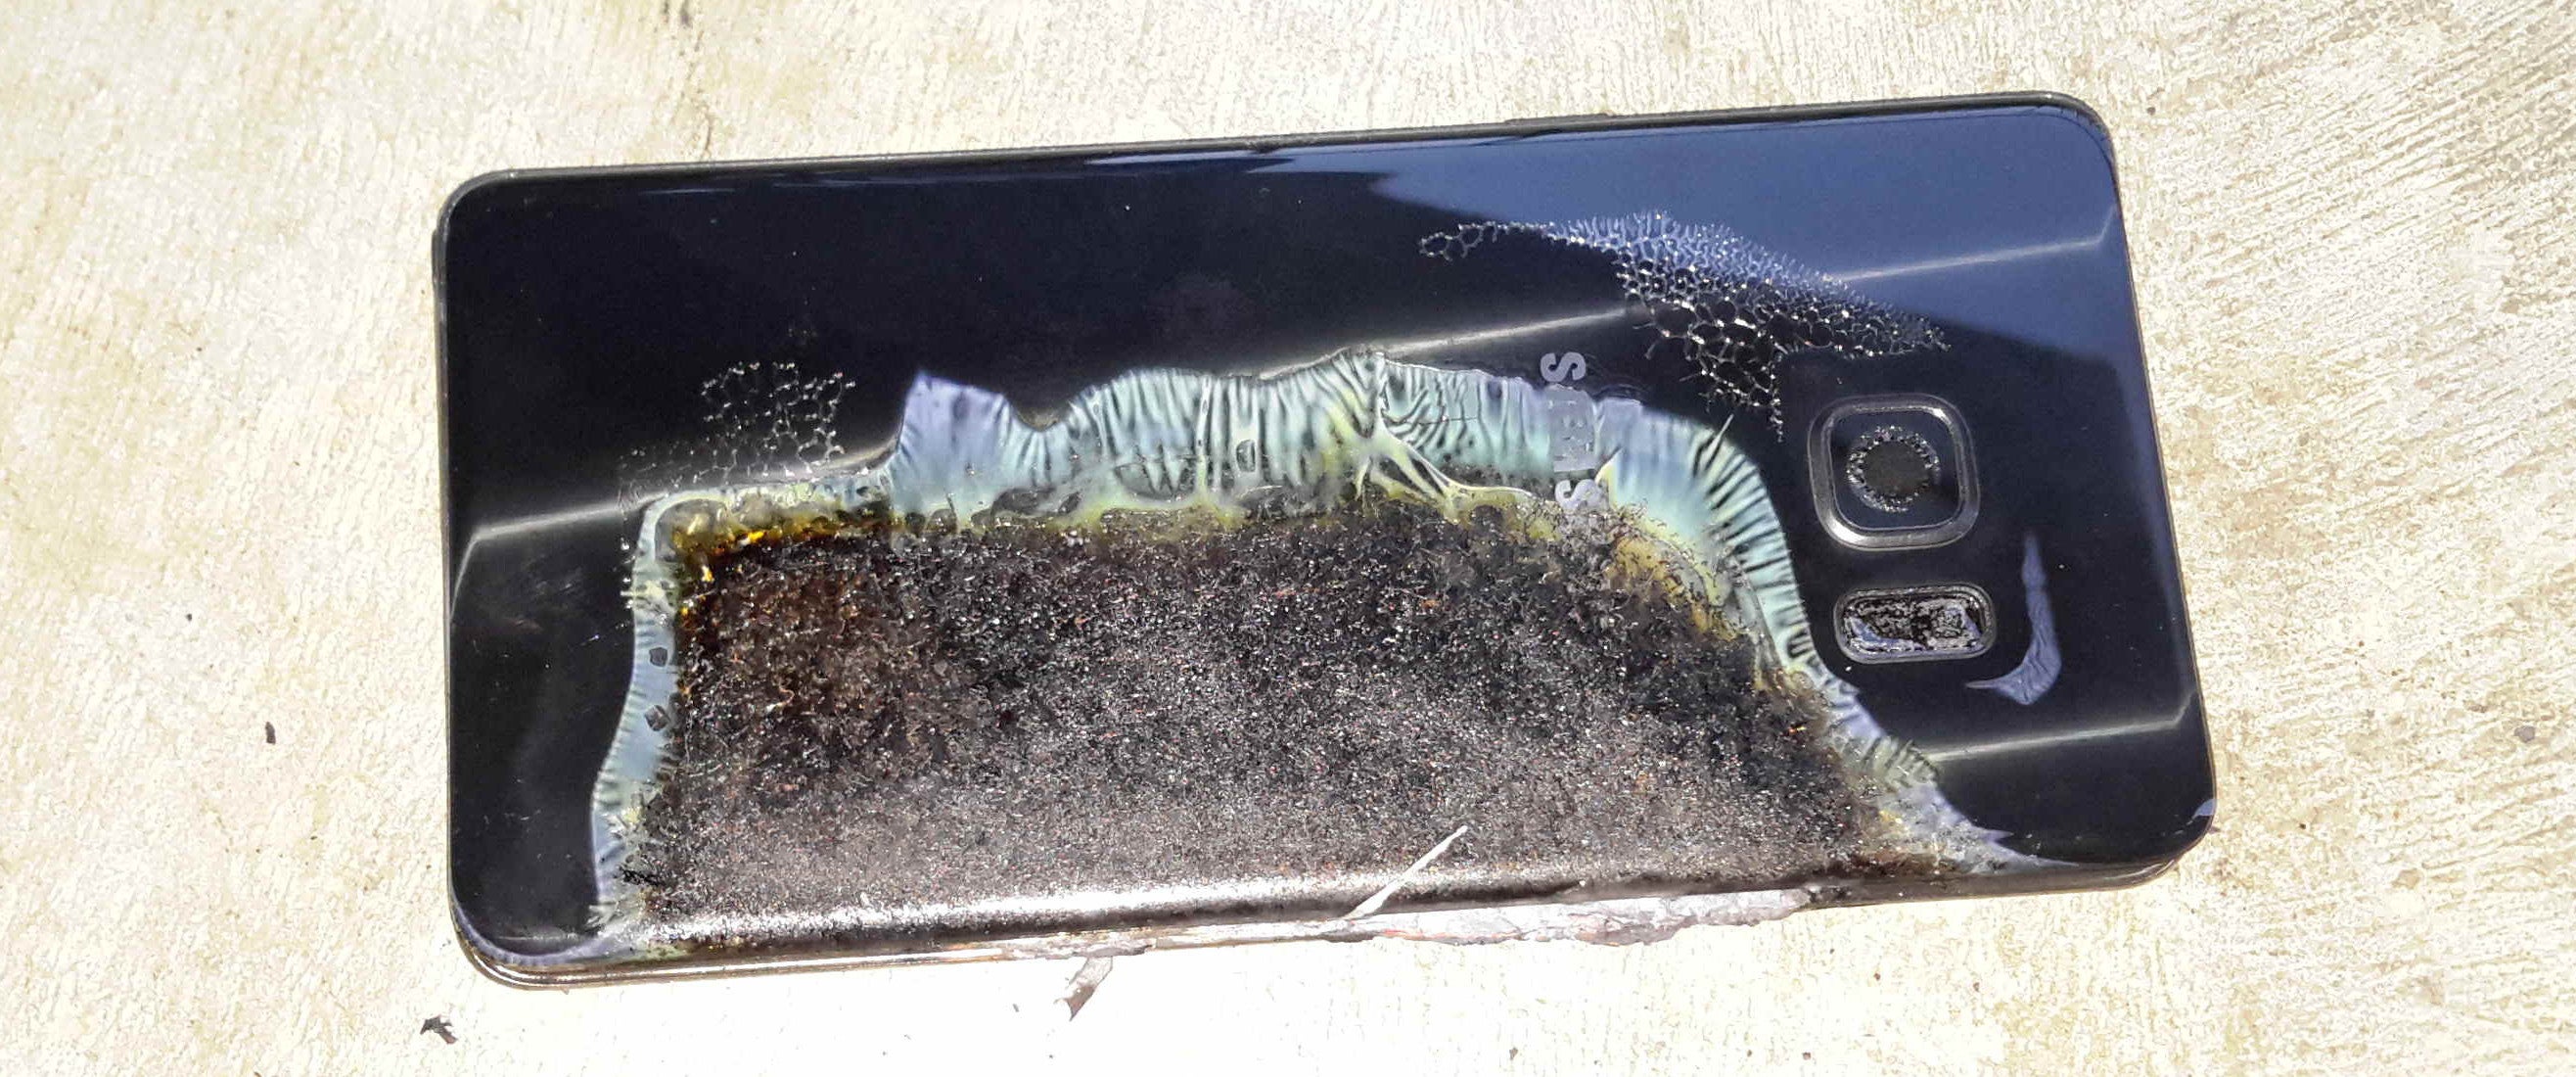 Samsung explains why some Galaxy Note 7 batteries tend to blow up